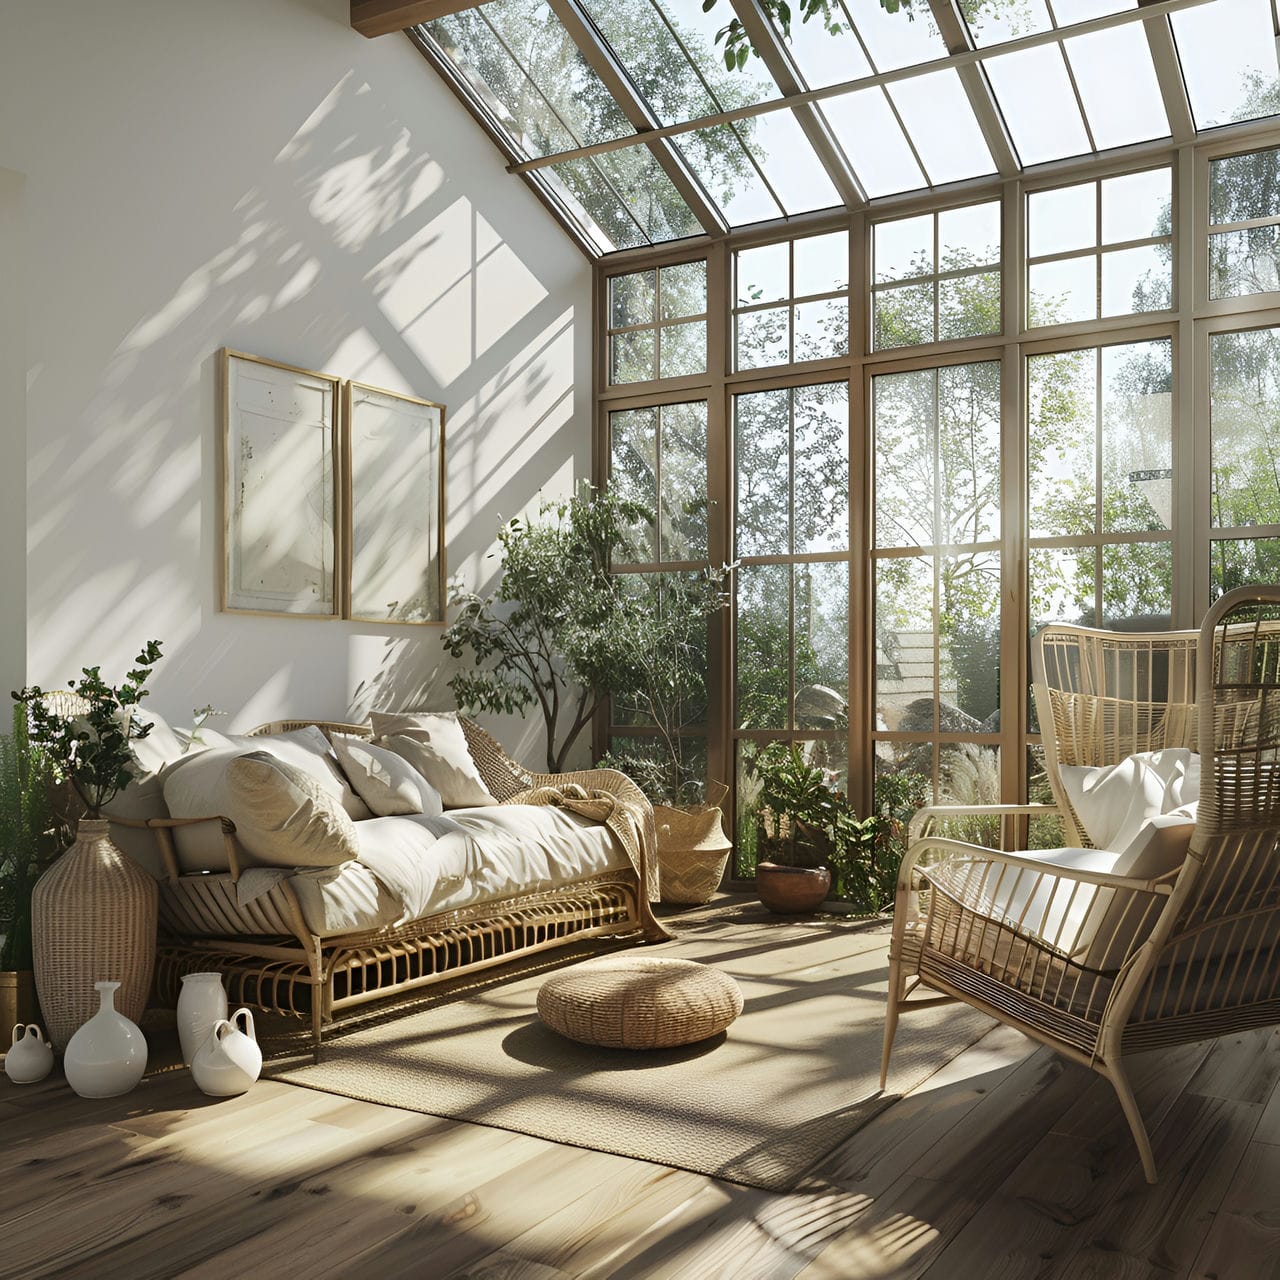 Sunroom: size, functionality, uses, furniture and renovation